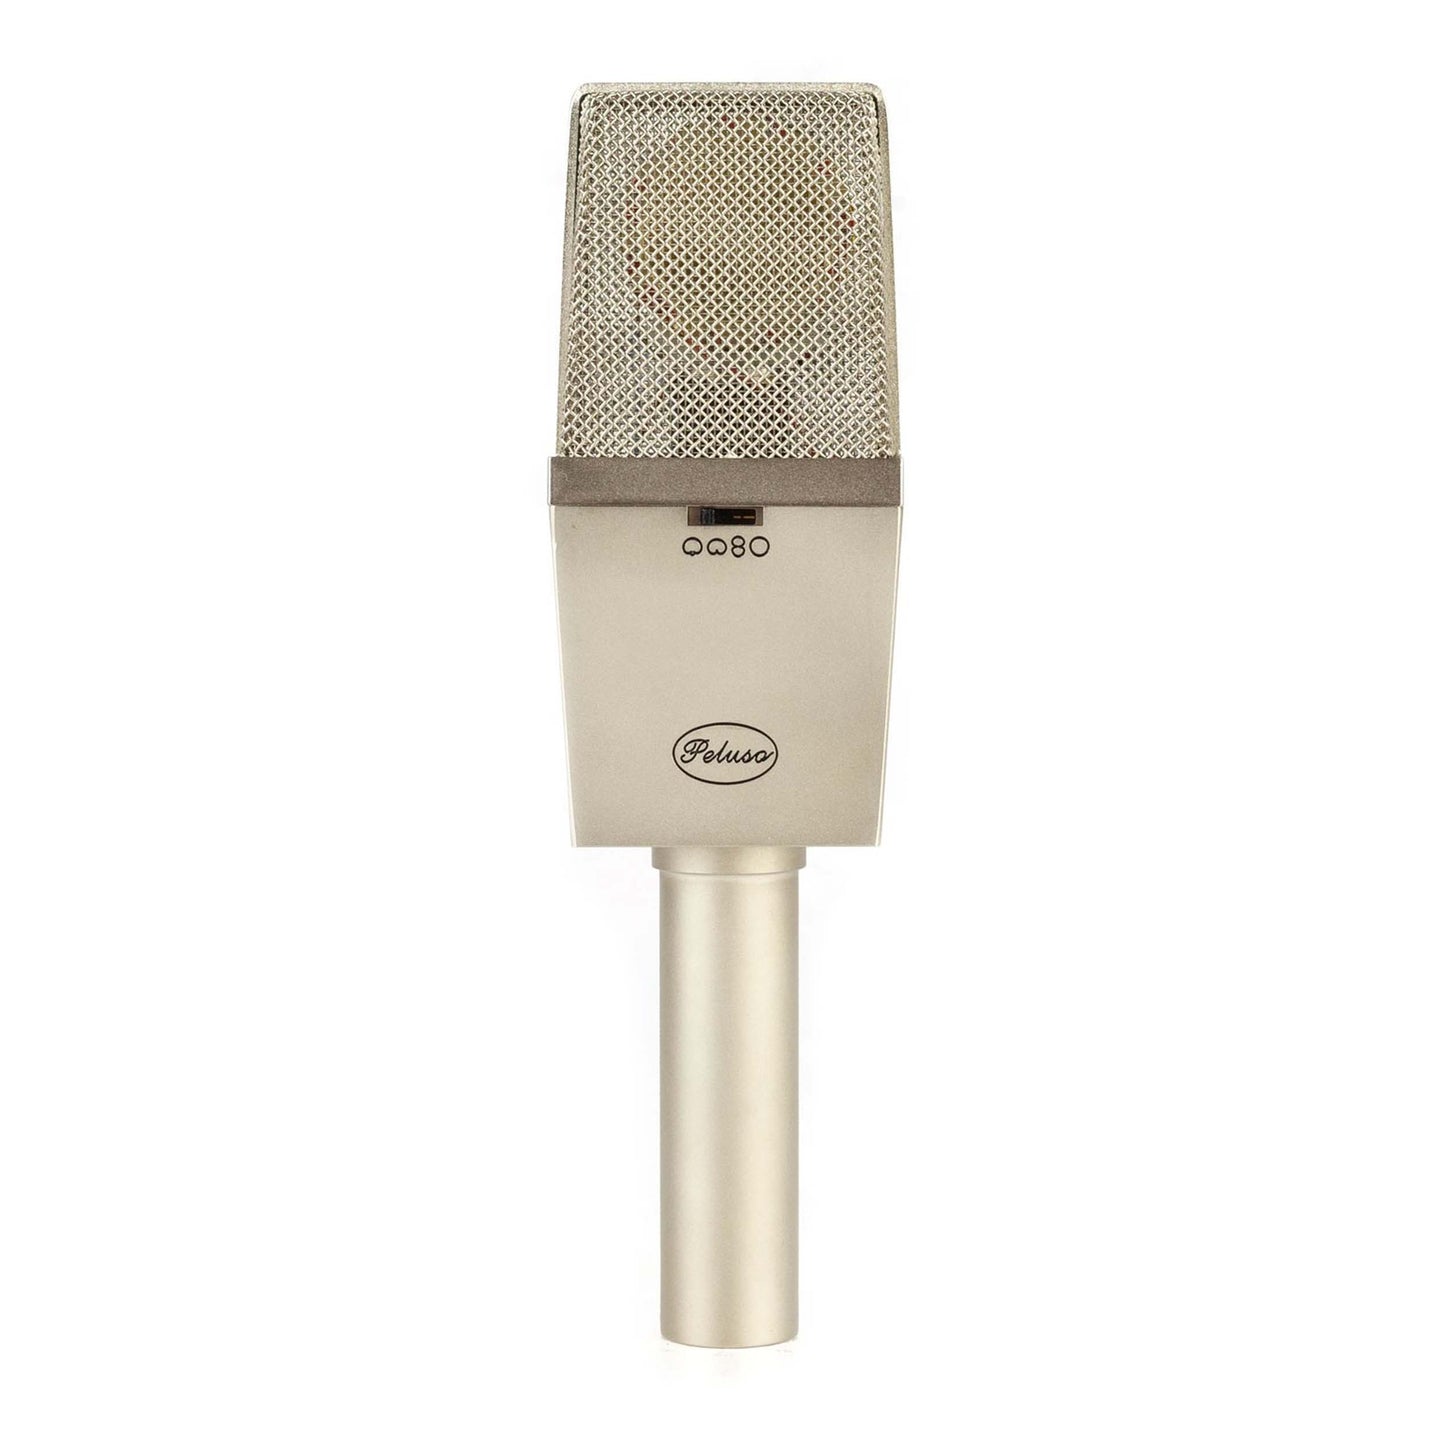 Peluso Microphone Labs P-414 Large Diaphragm Solid State Microphone